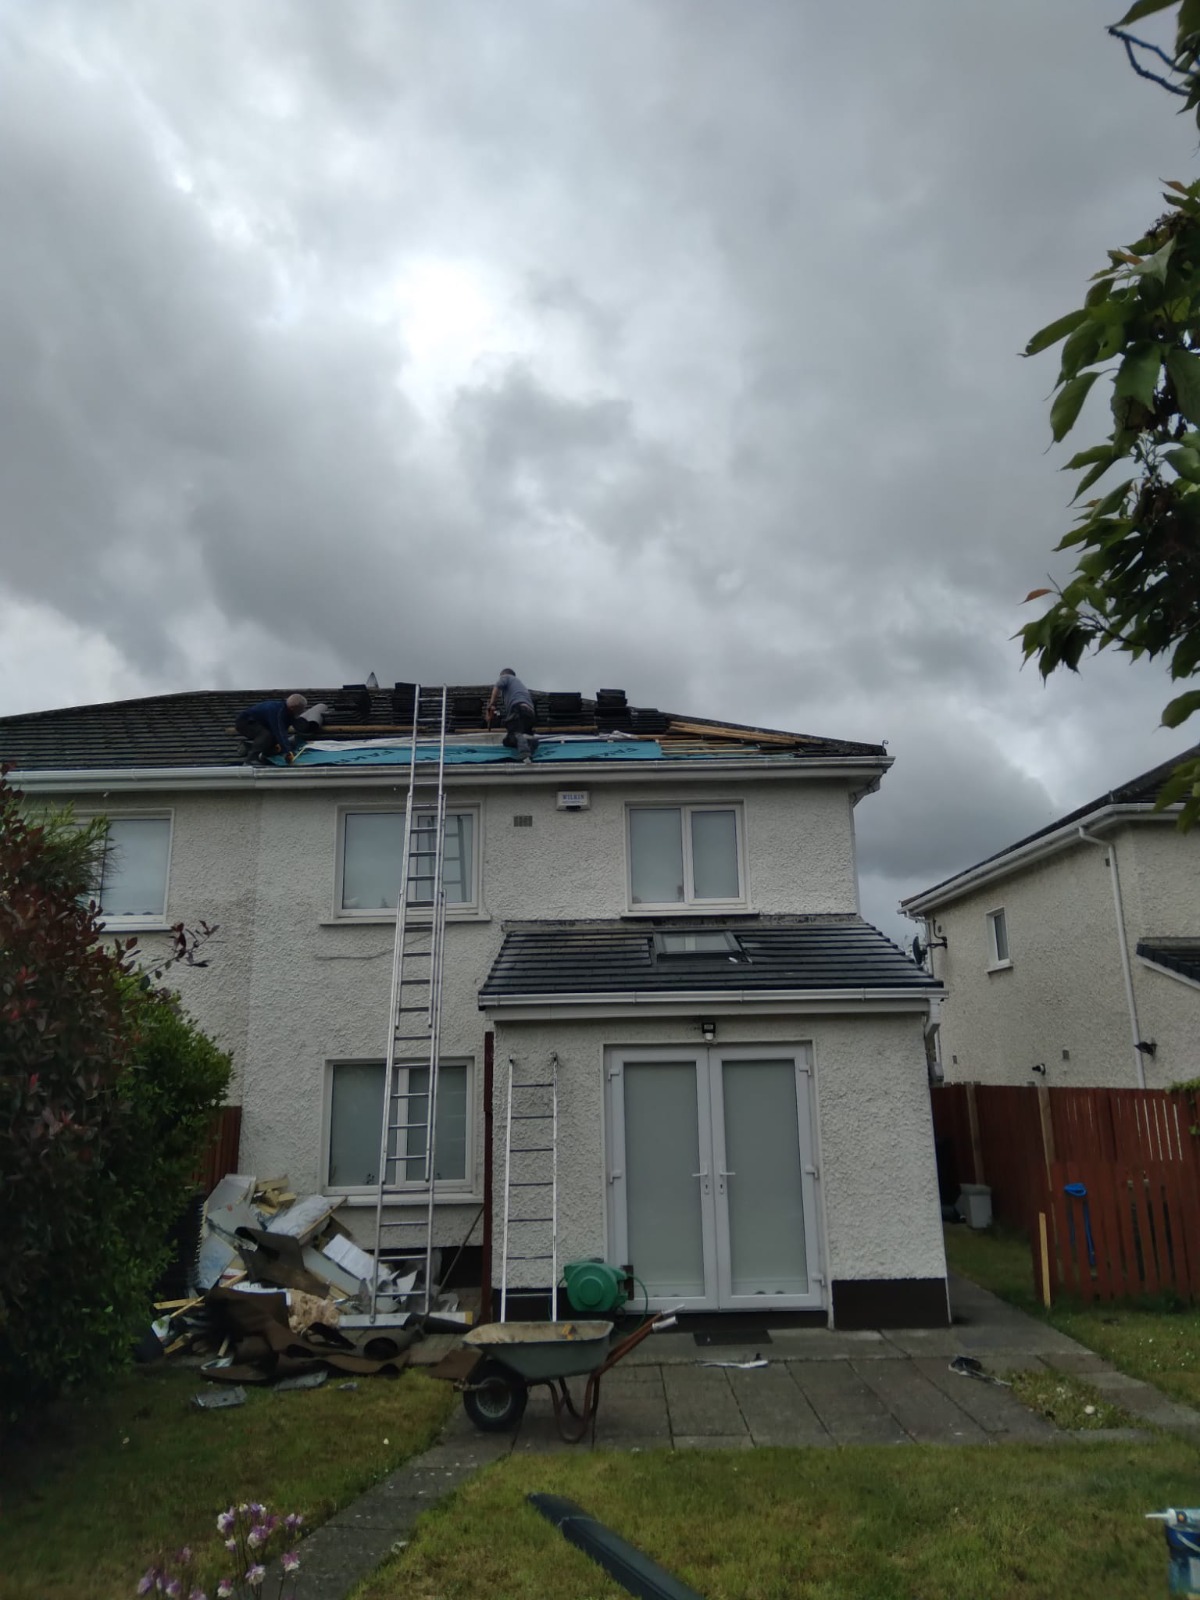 What roofing services are available in Dublin City?